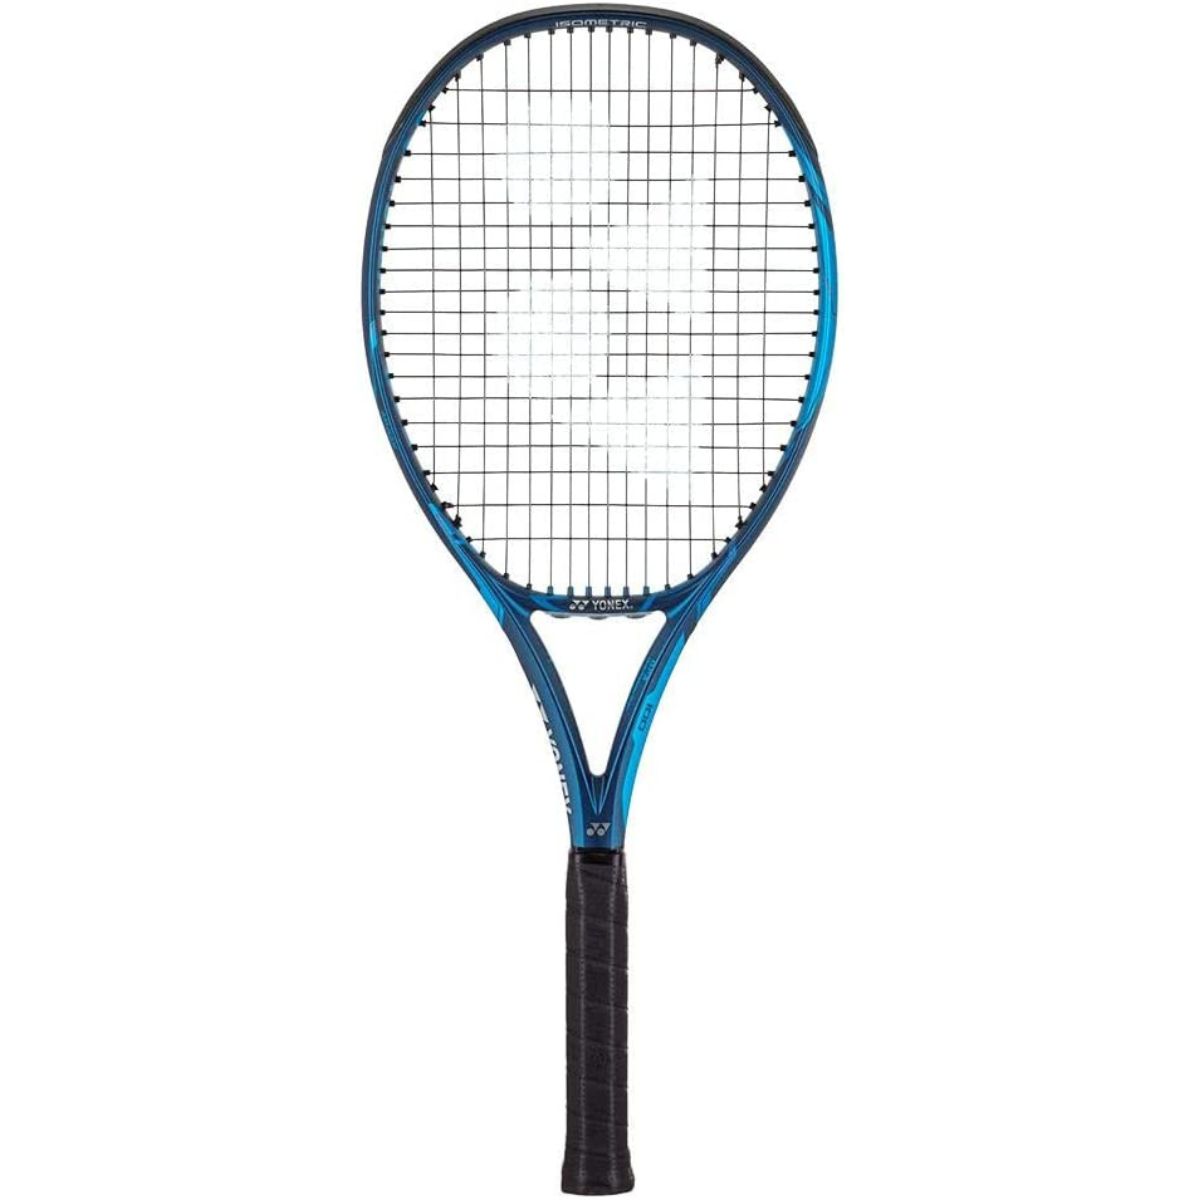 The Best Tennis Rackets for Advanced Players Options: Yonex EZONE 98